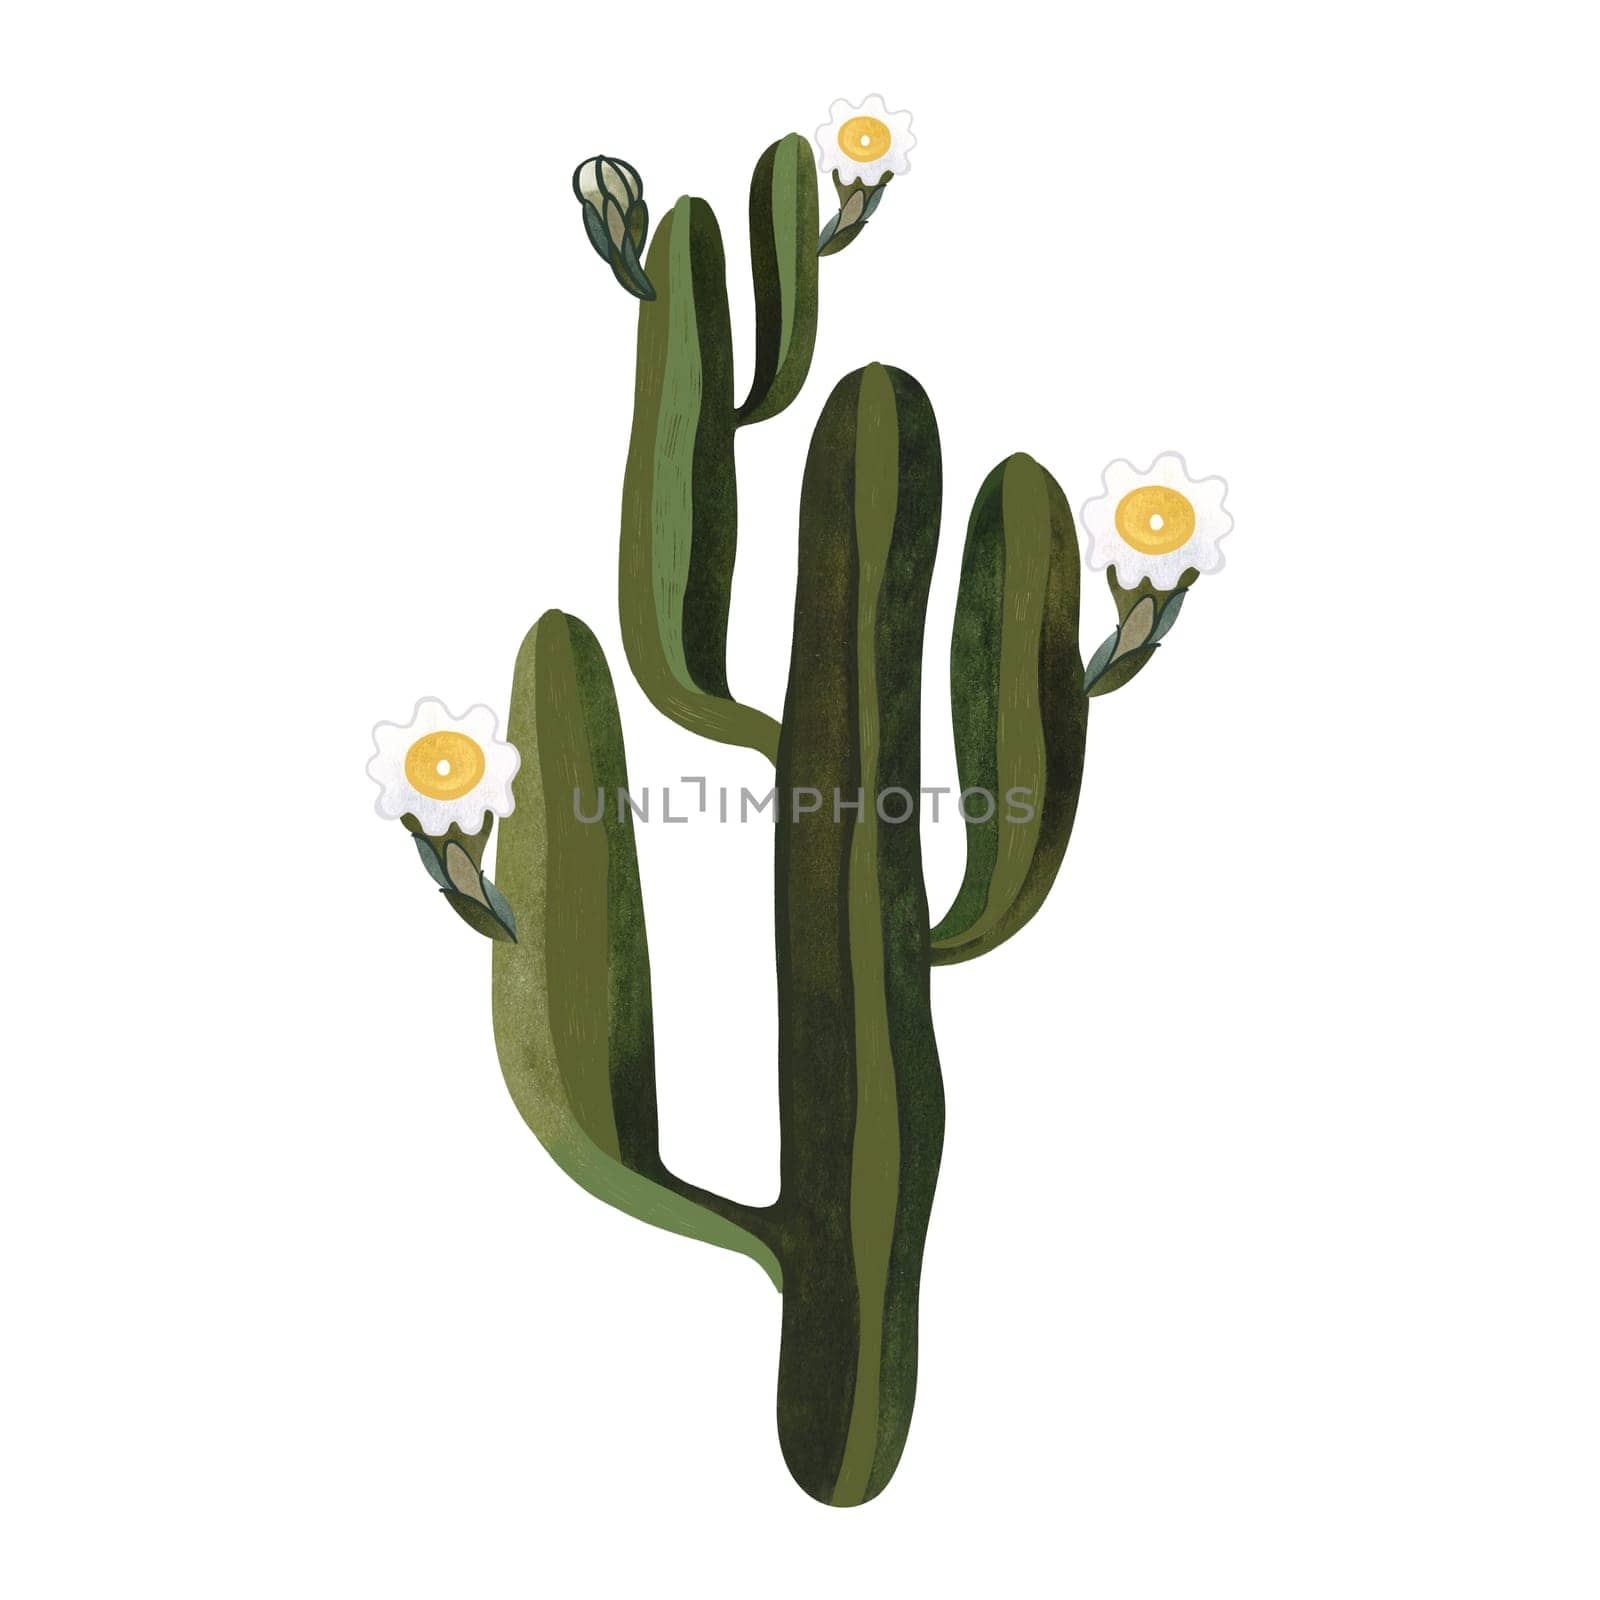 Saguaro. Blooming cactus with white and yellow flowers. Plants for the home. Floriculture. Desert flora. Isolated watercolor illustration on white background. Clipart